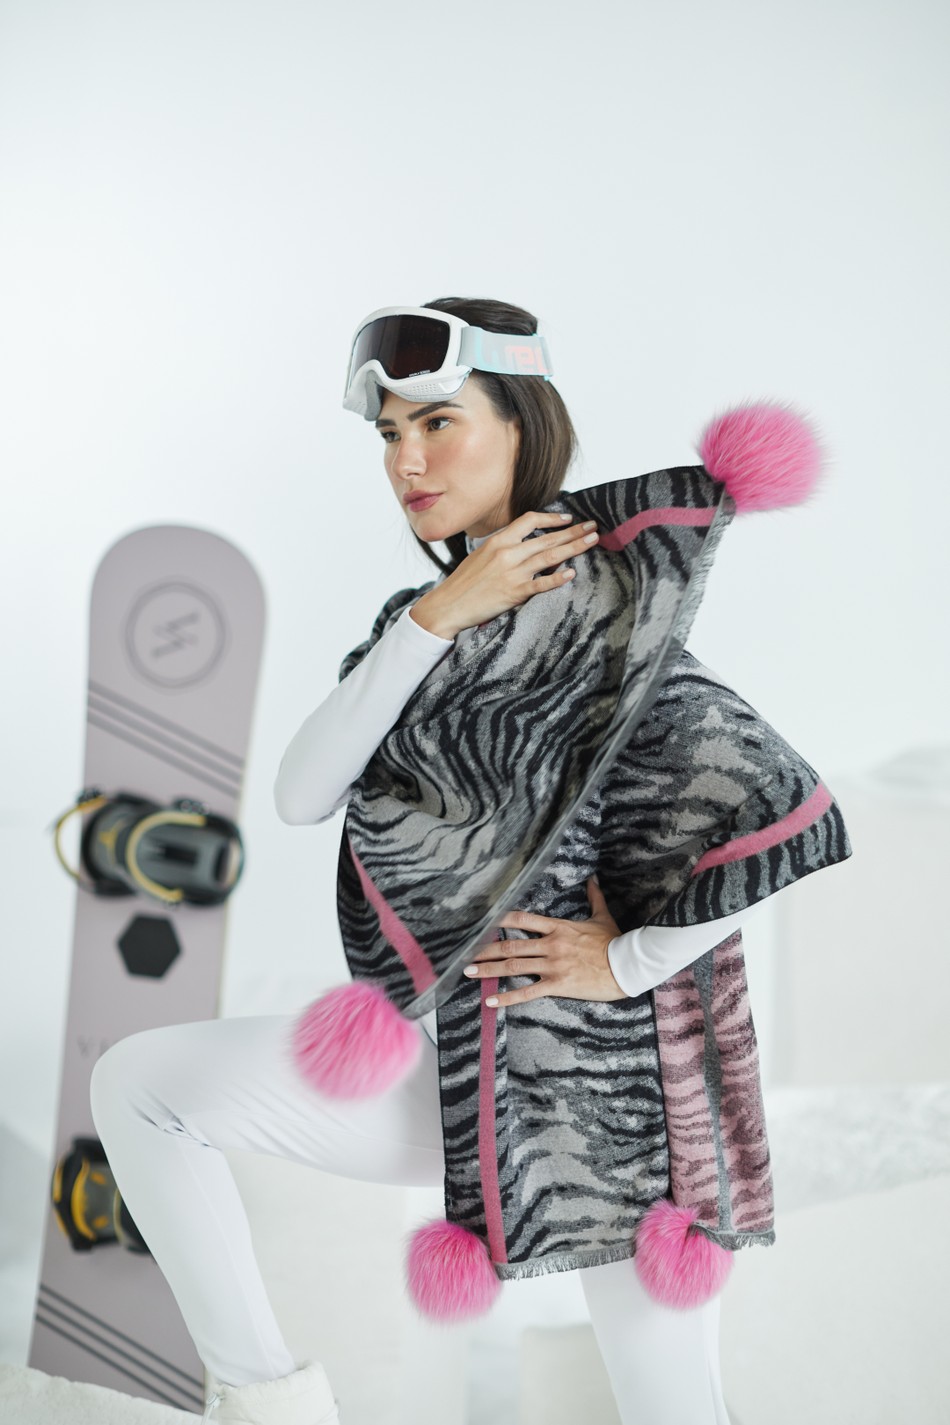 Missguided belted ski suit in silver, ASOS